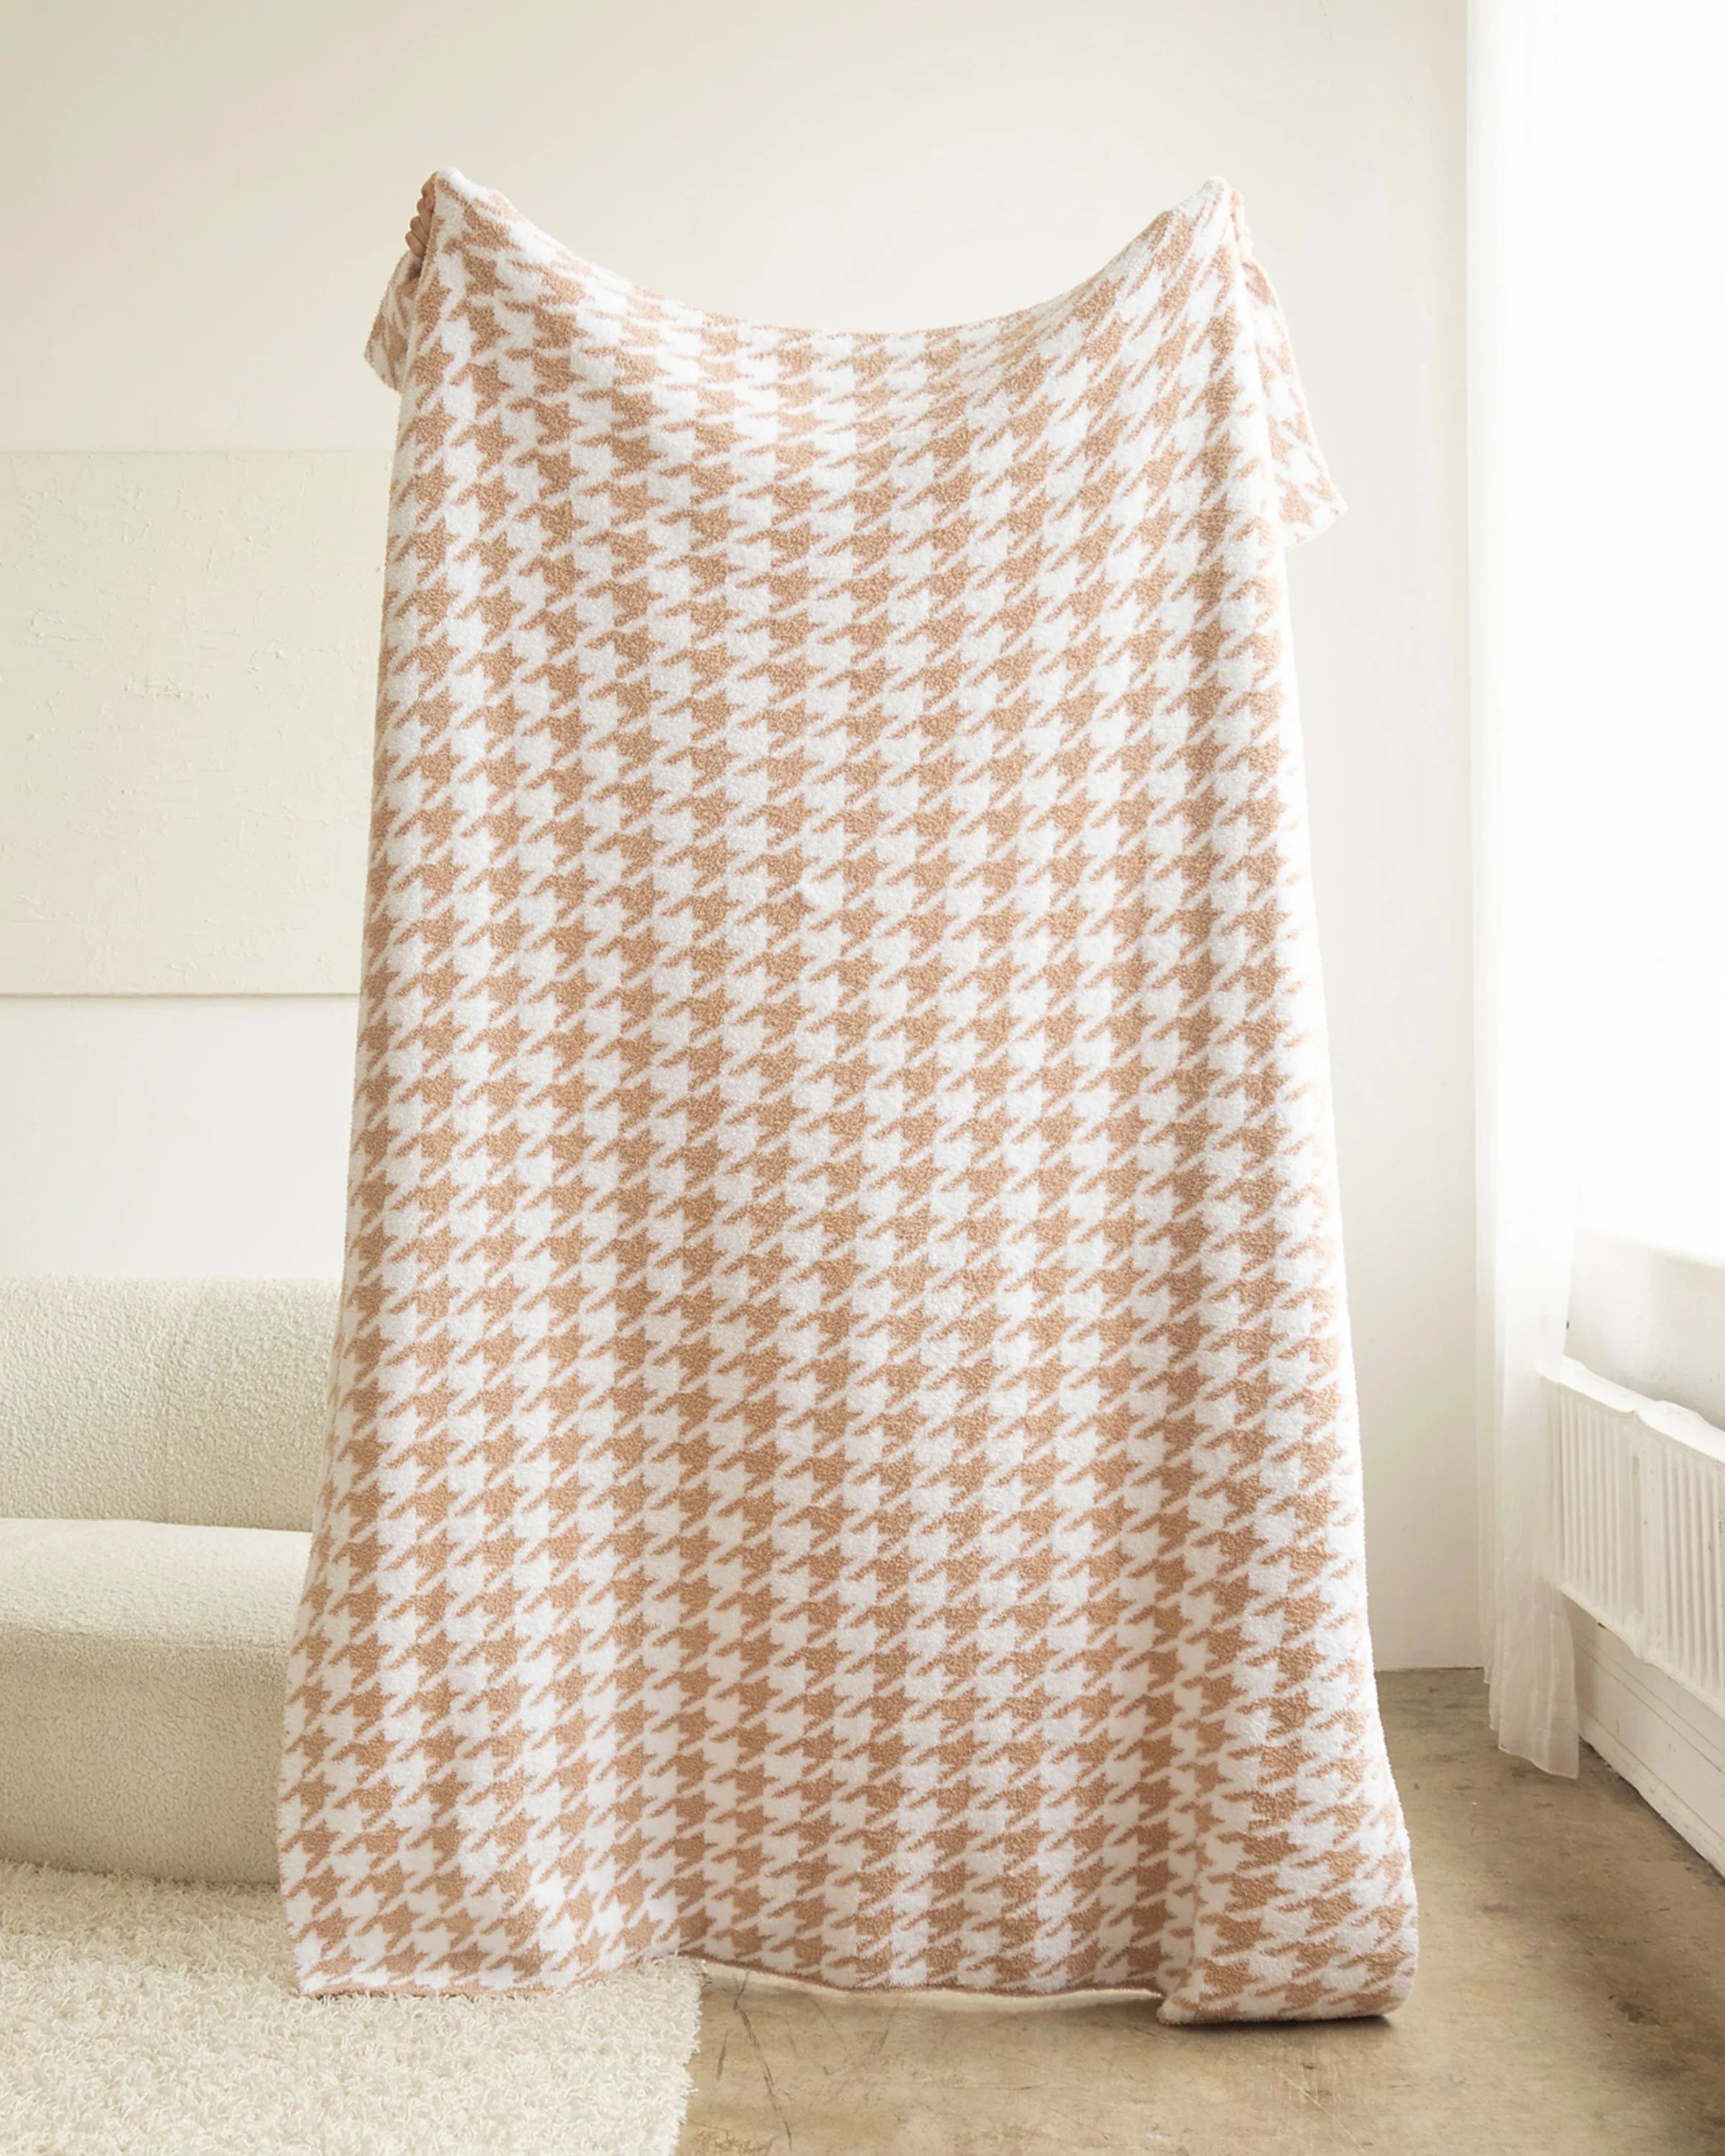 HOUNDSTOOTH BLANKET - SAND/WHITE | The Act Of Lounging